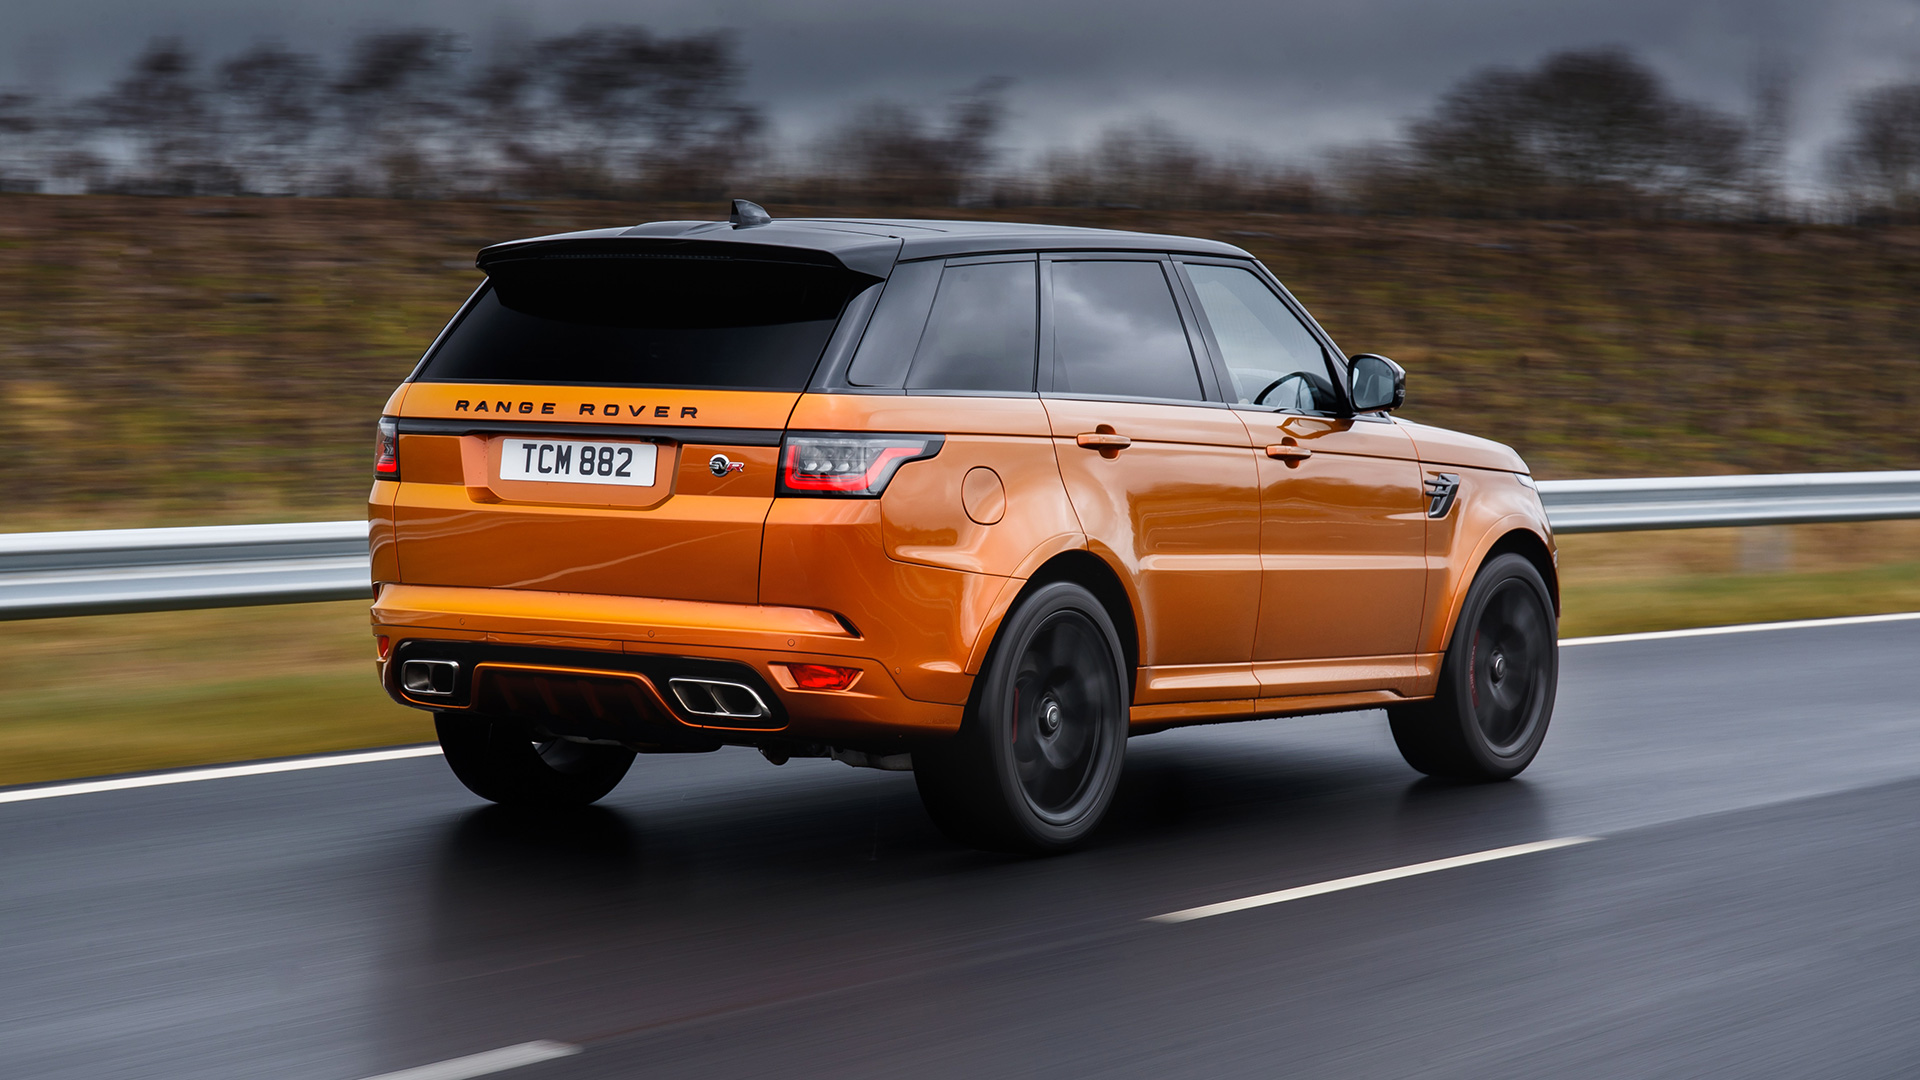 Land Rover Range Rover Sport 2019 2.0 l Petrol S - Price in India, Mileage,  Reviews, Colours, Specification, Images - Overdrive